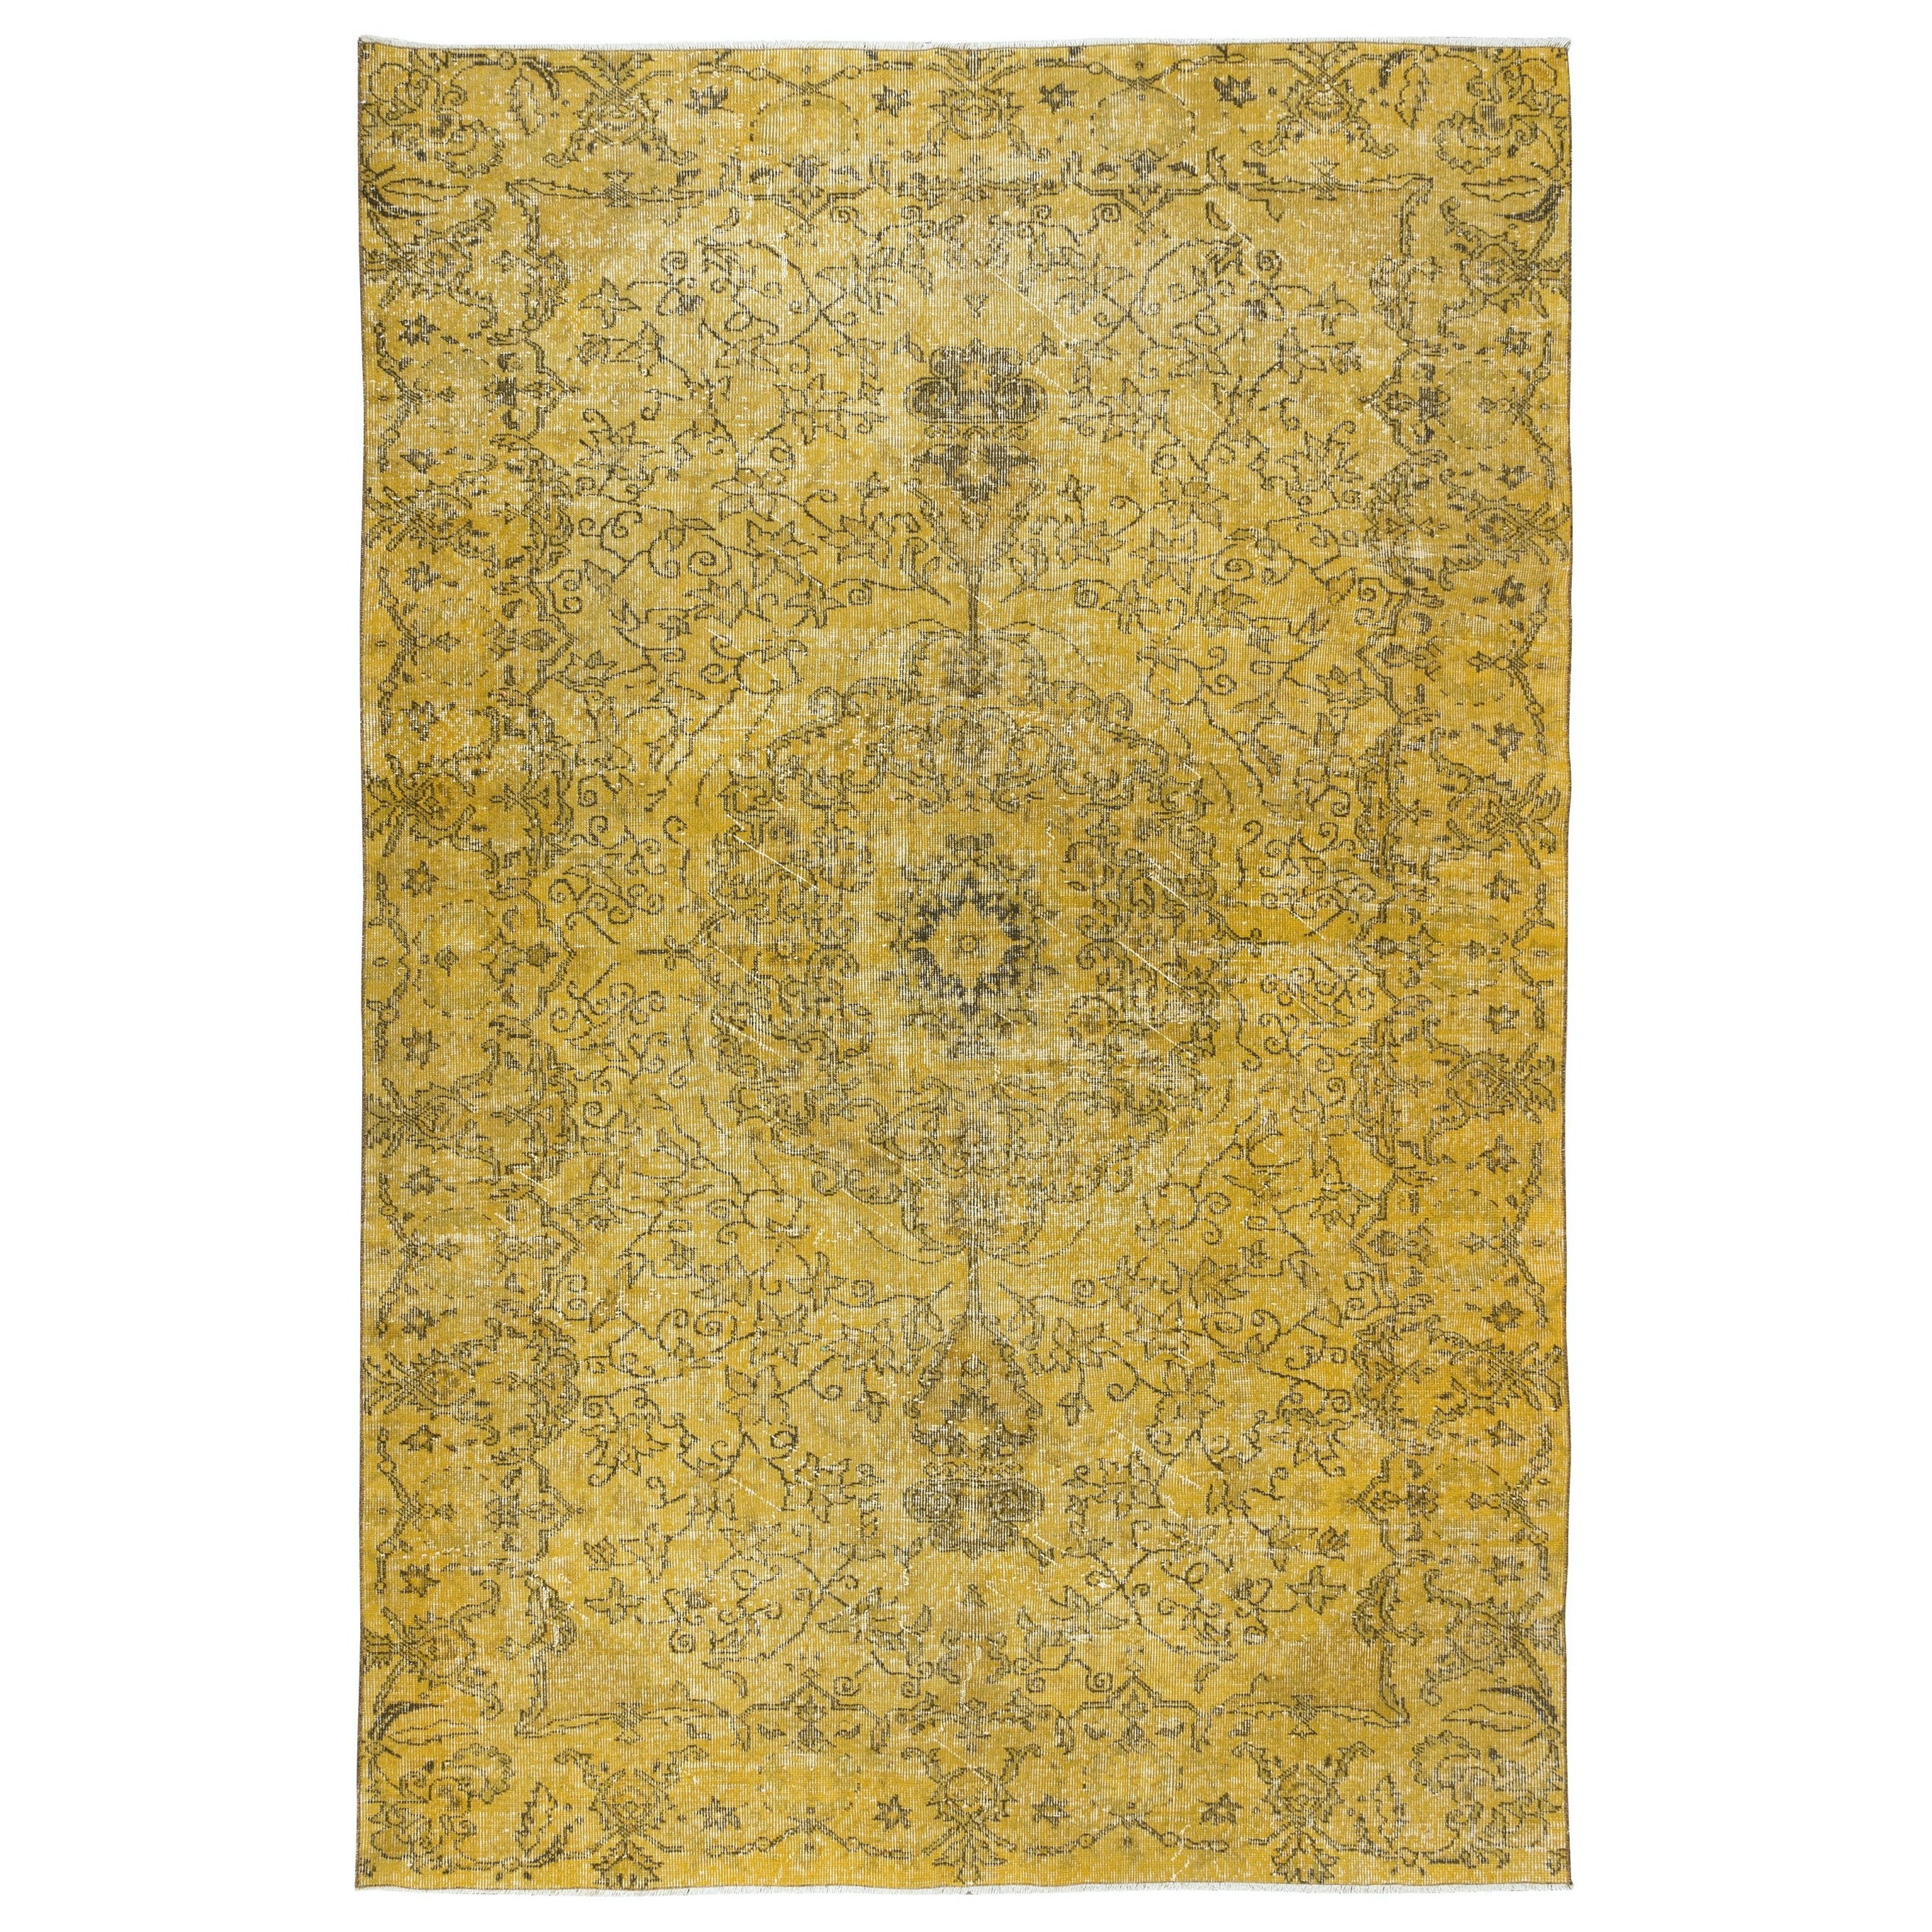 6.4x9.4 Ft Handmade Turkish Area Rug in Yellow, Ideal for Contemporary Interiors